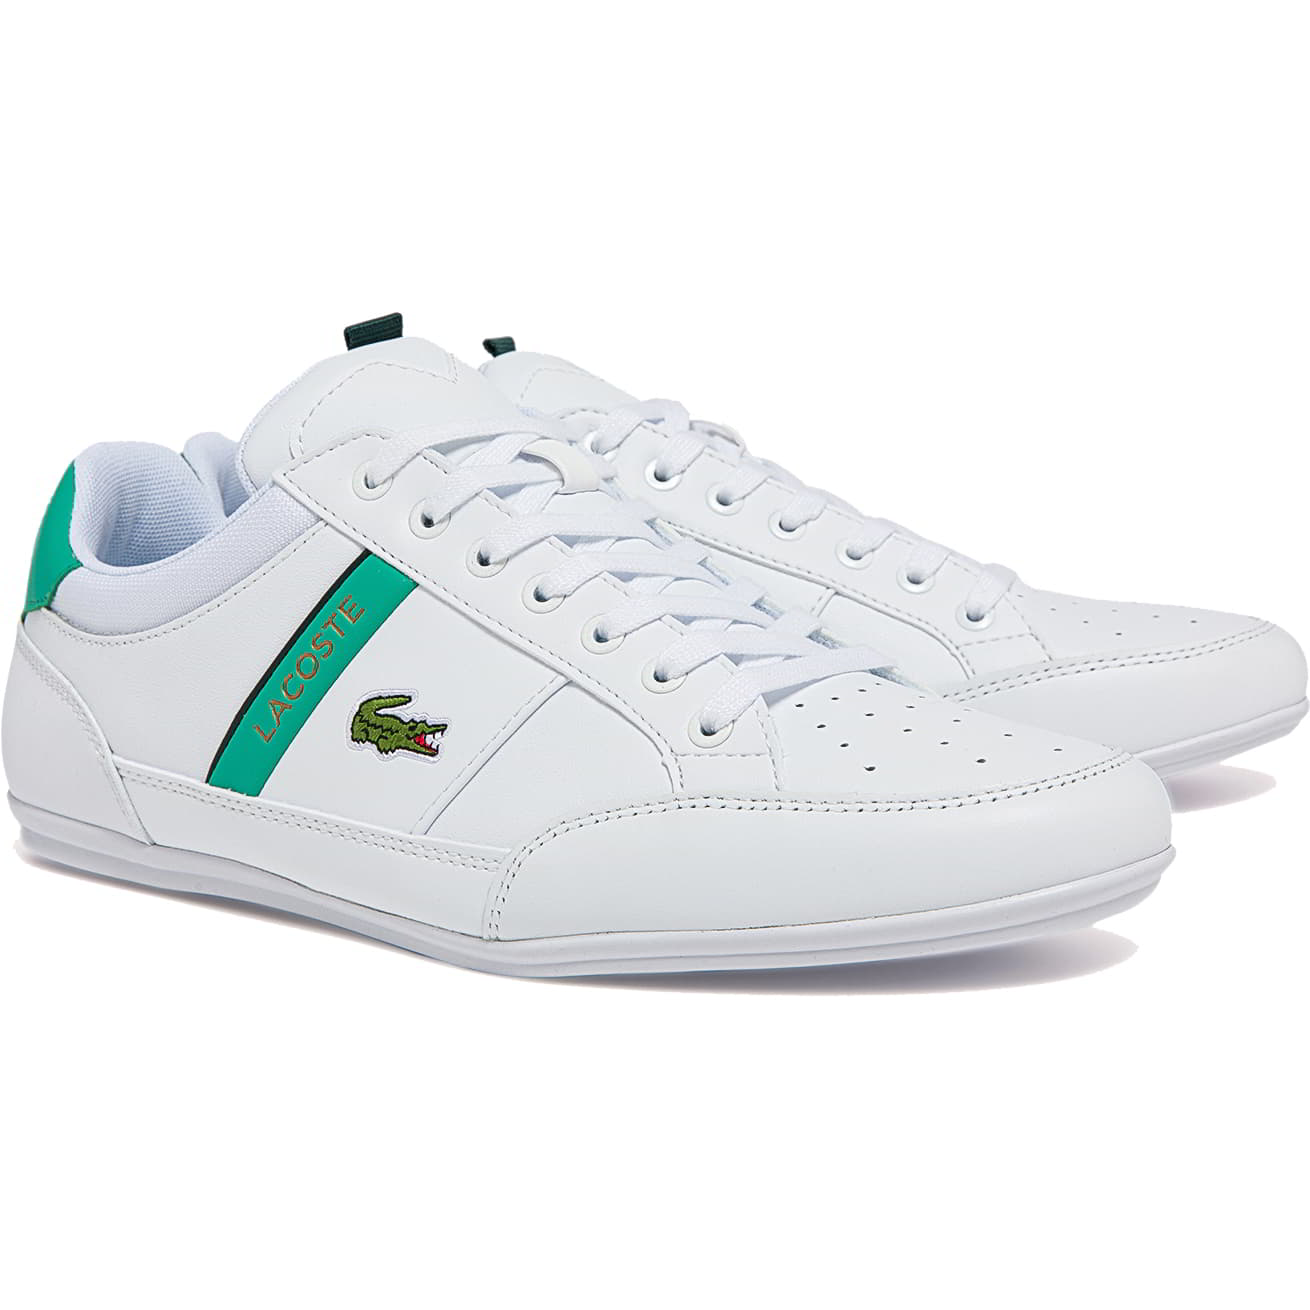 Lacoste Mens Chaymon 722-1 Leather Trainers - UK 11 White 2951